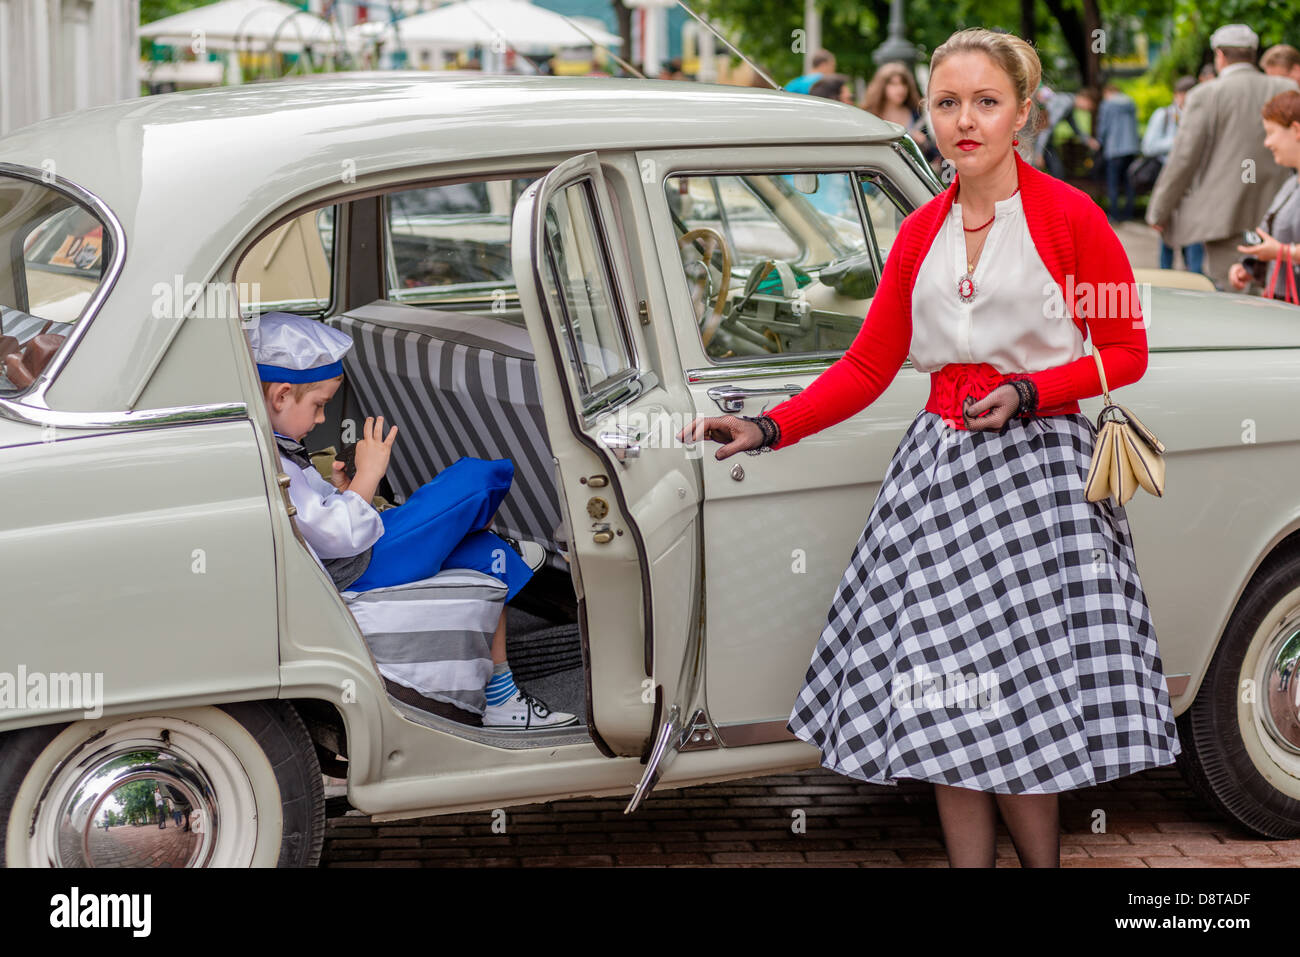 MOSCOW, RUSSIA - Retro festival 'Days of history' in Hermitage Garden. Old-fashioned woman and boy. Moscow, May 26, 2013 Stock Photo